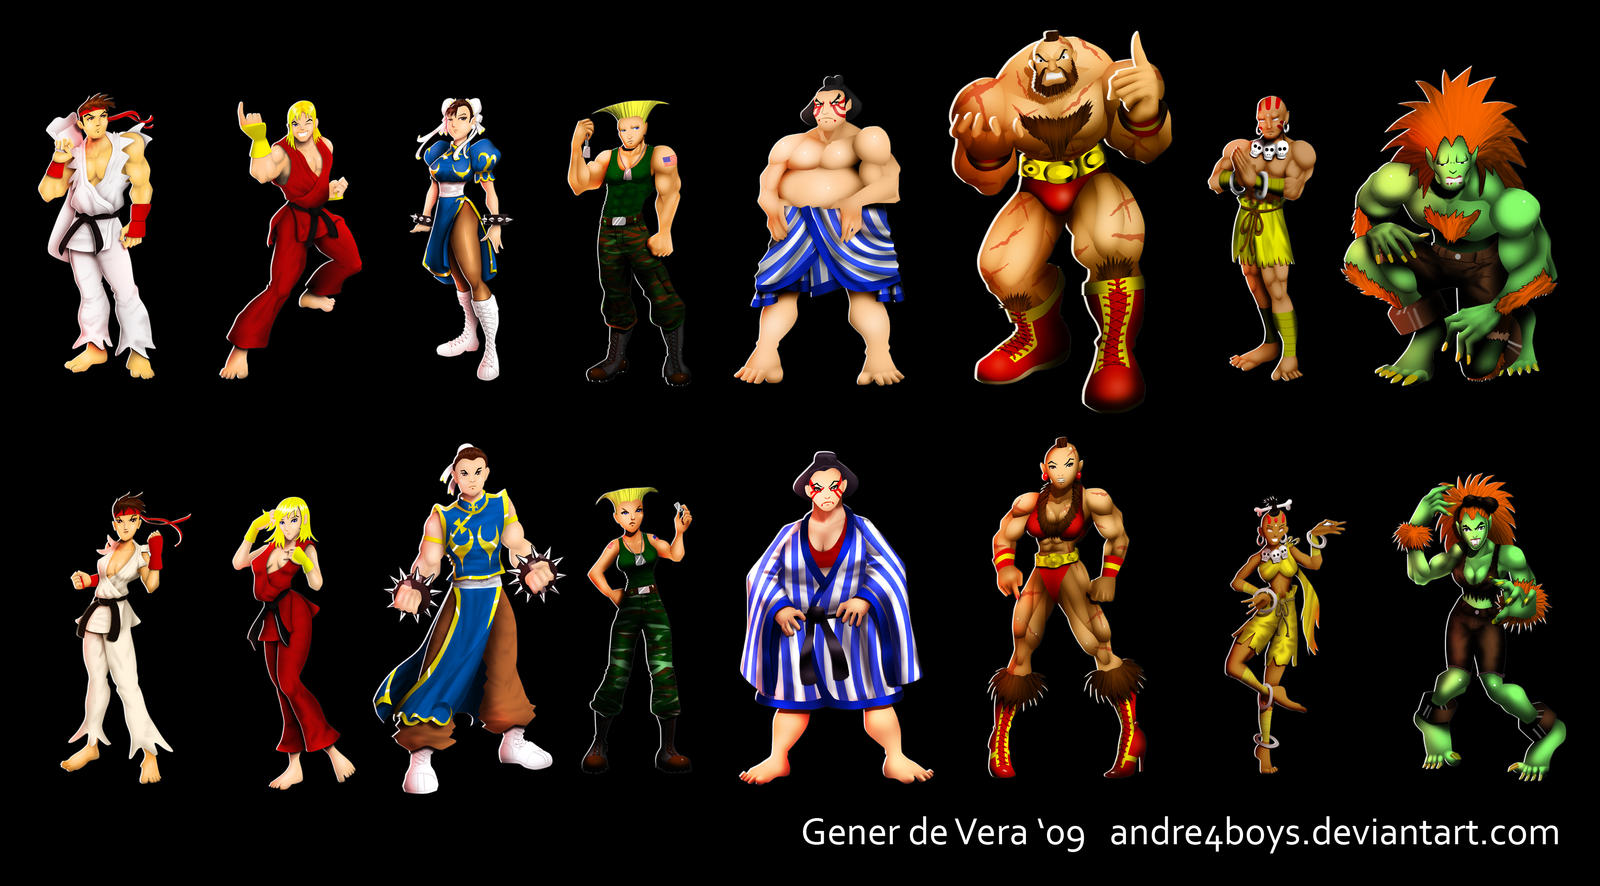  - All_Genders__Street_Fighter_by_andre4boys